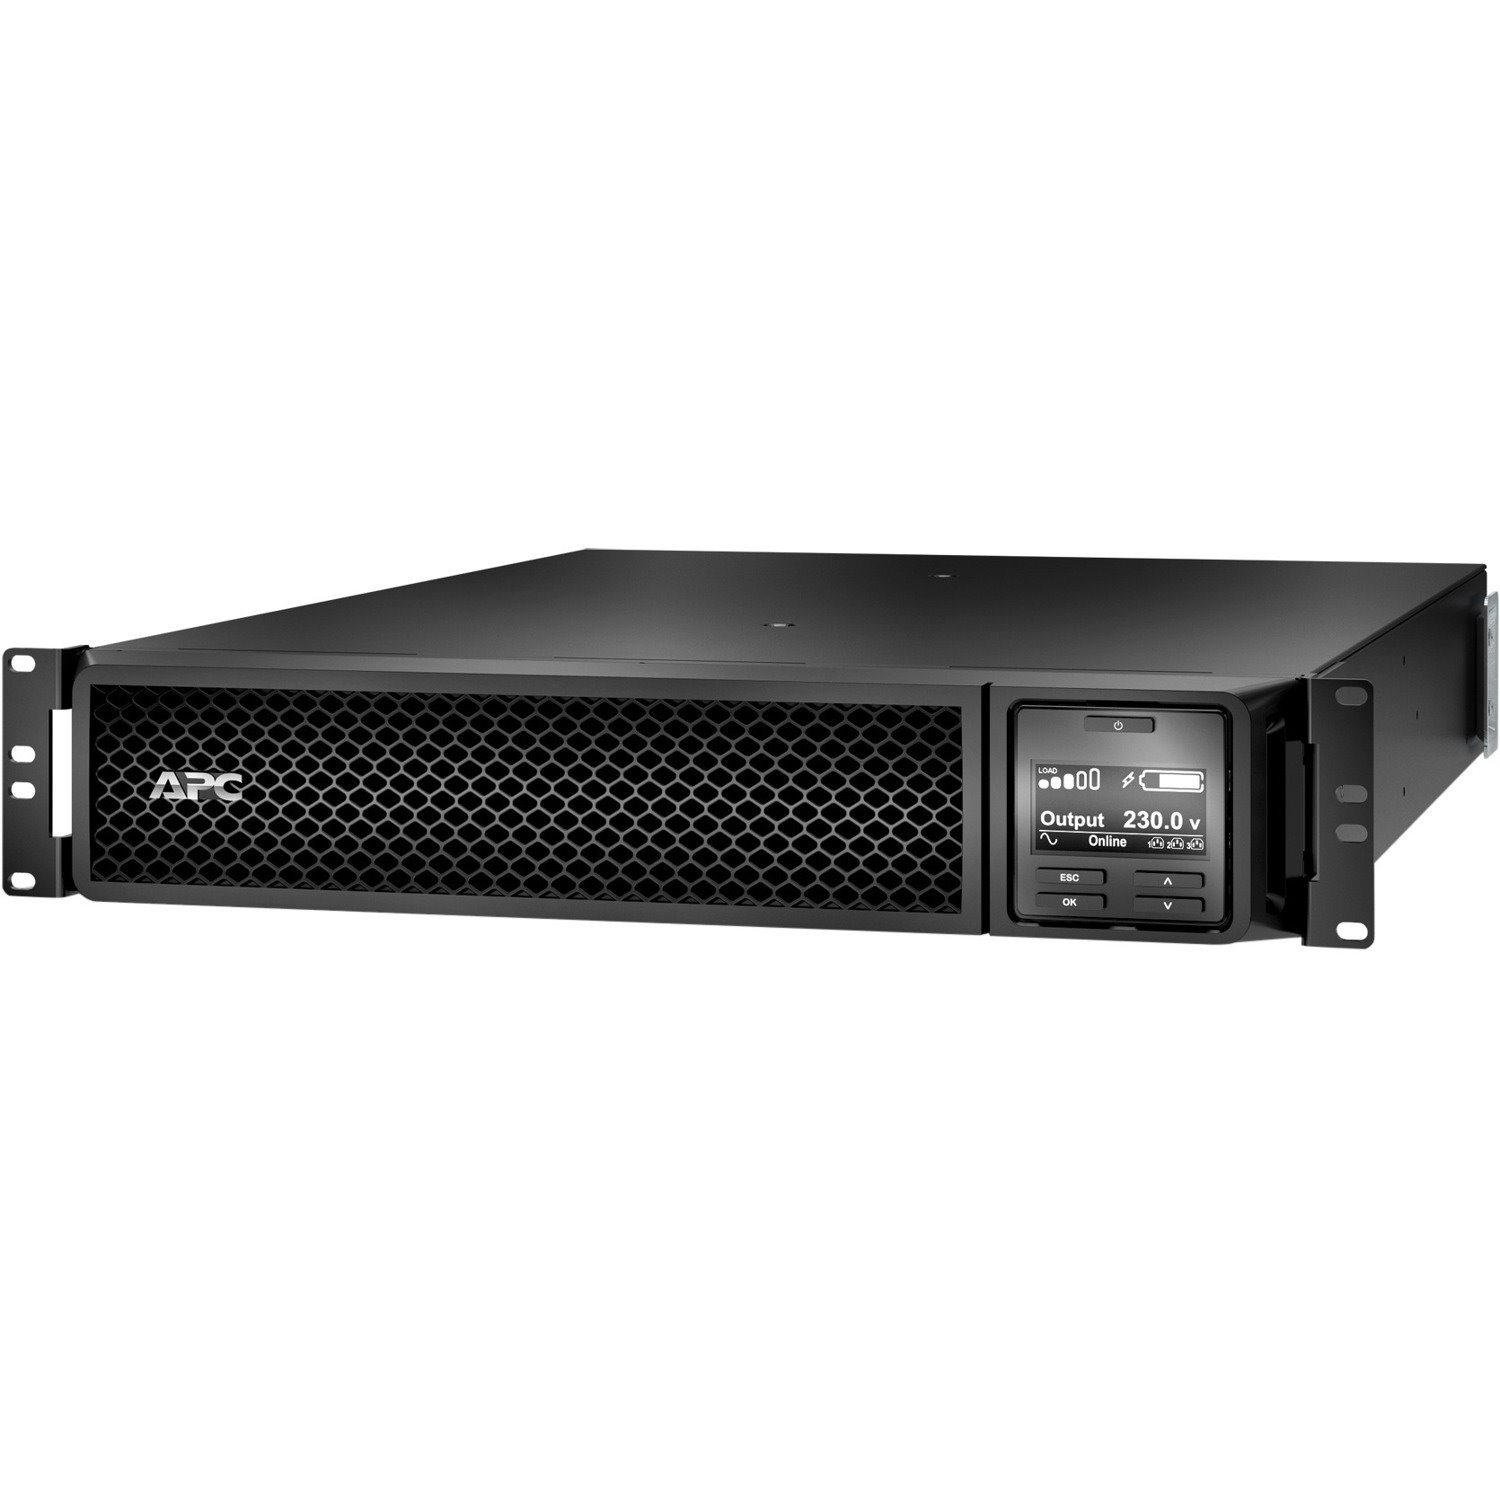 APC by Schneider Electric Smart-UPS 1.5KVA Tower/Rack Convertible UPS